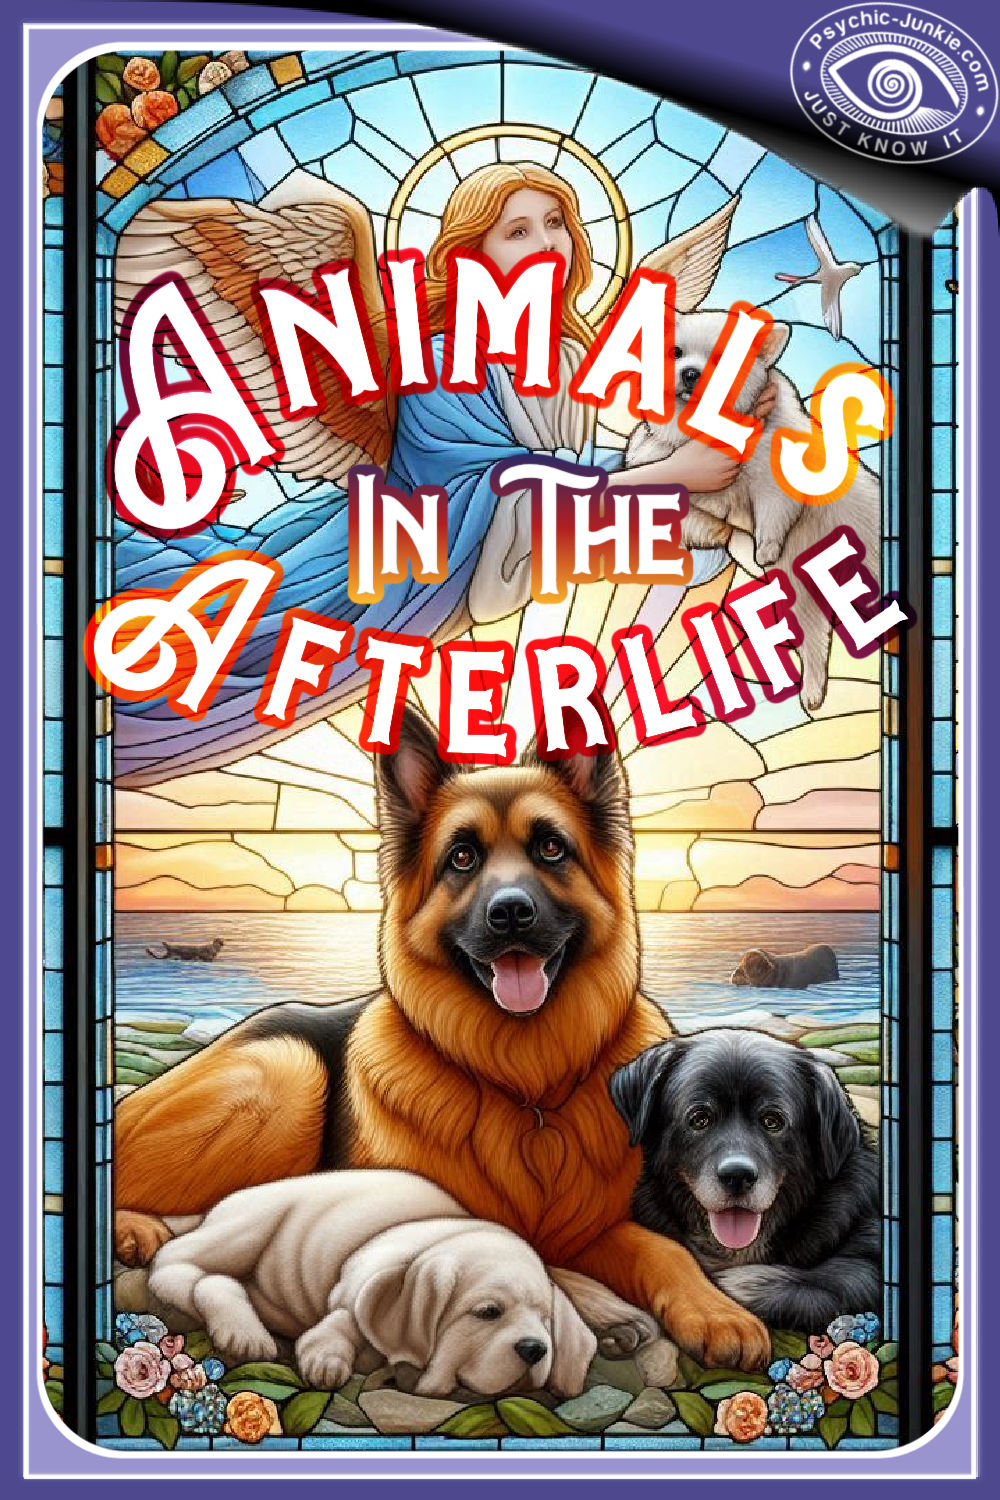 Is There Afterlife For Animals?